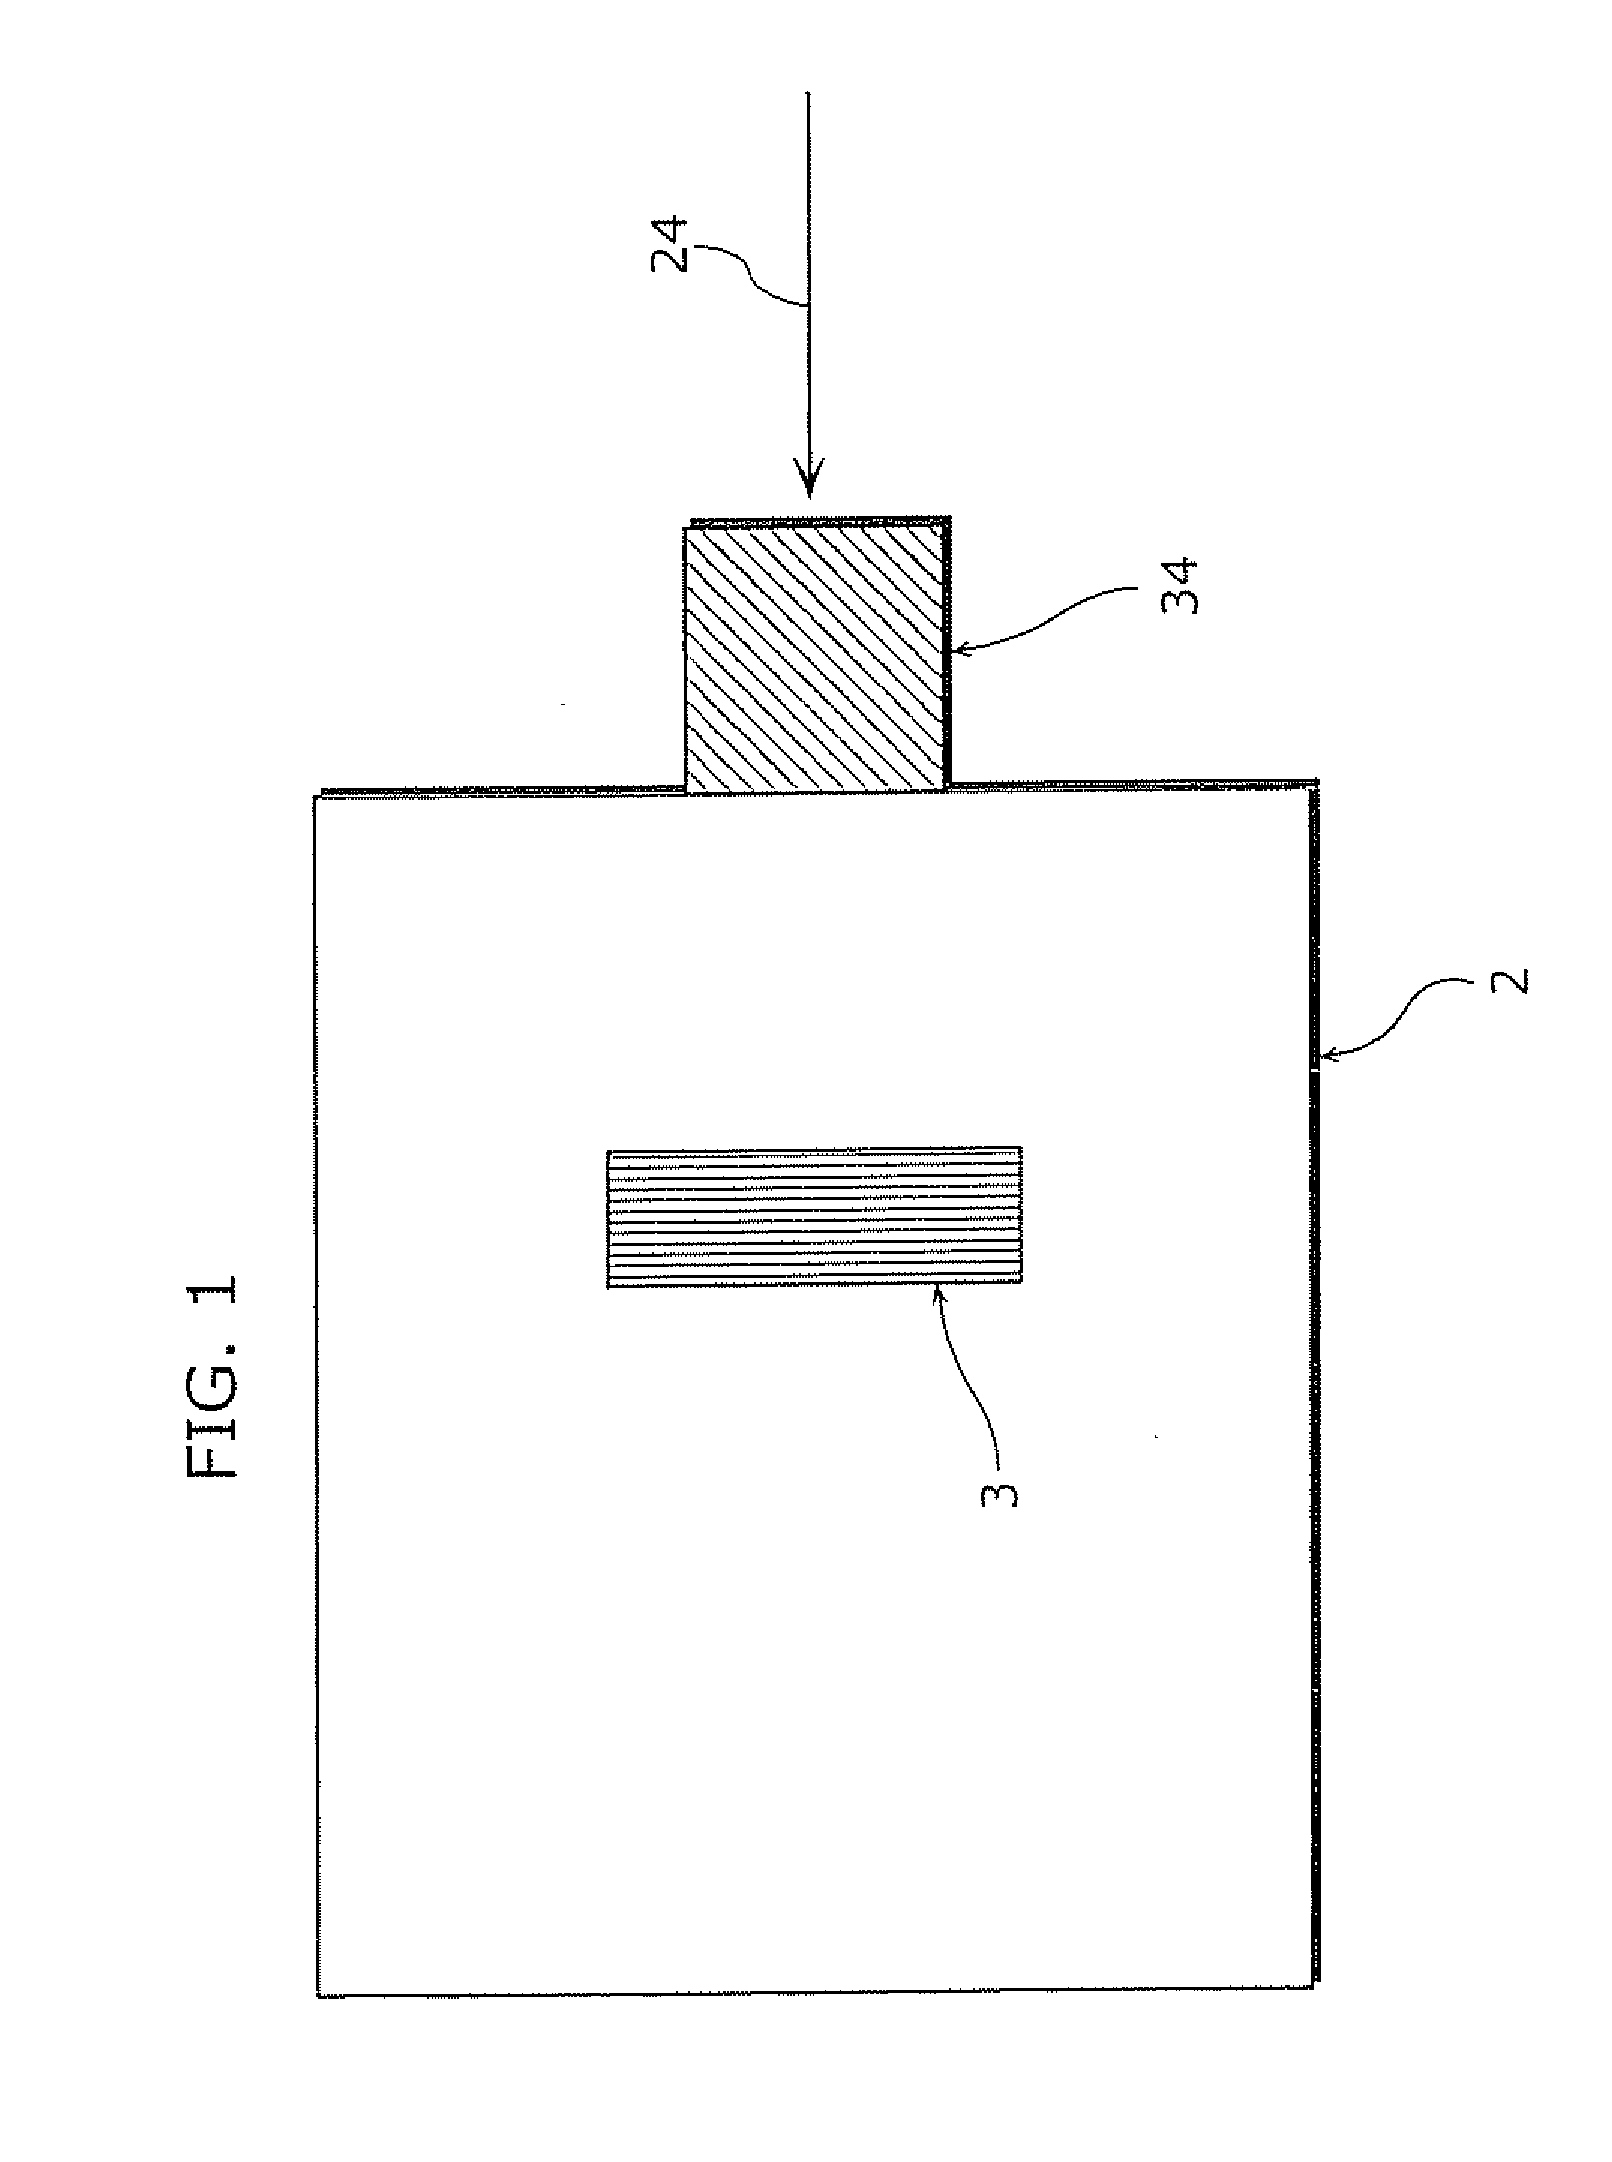 Solid-state image sensor and manufacturing method thereof